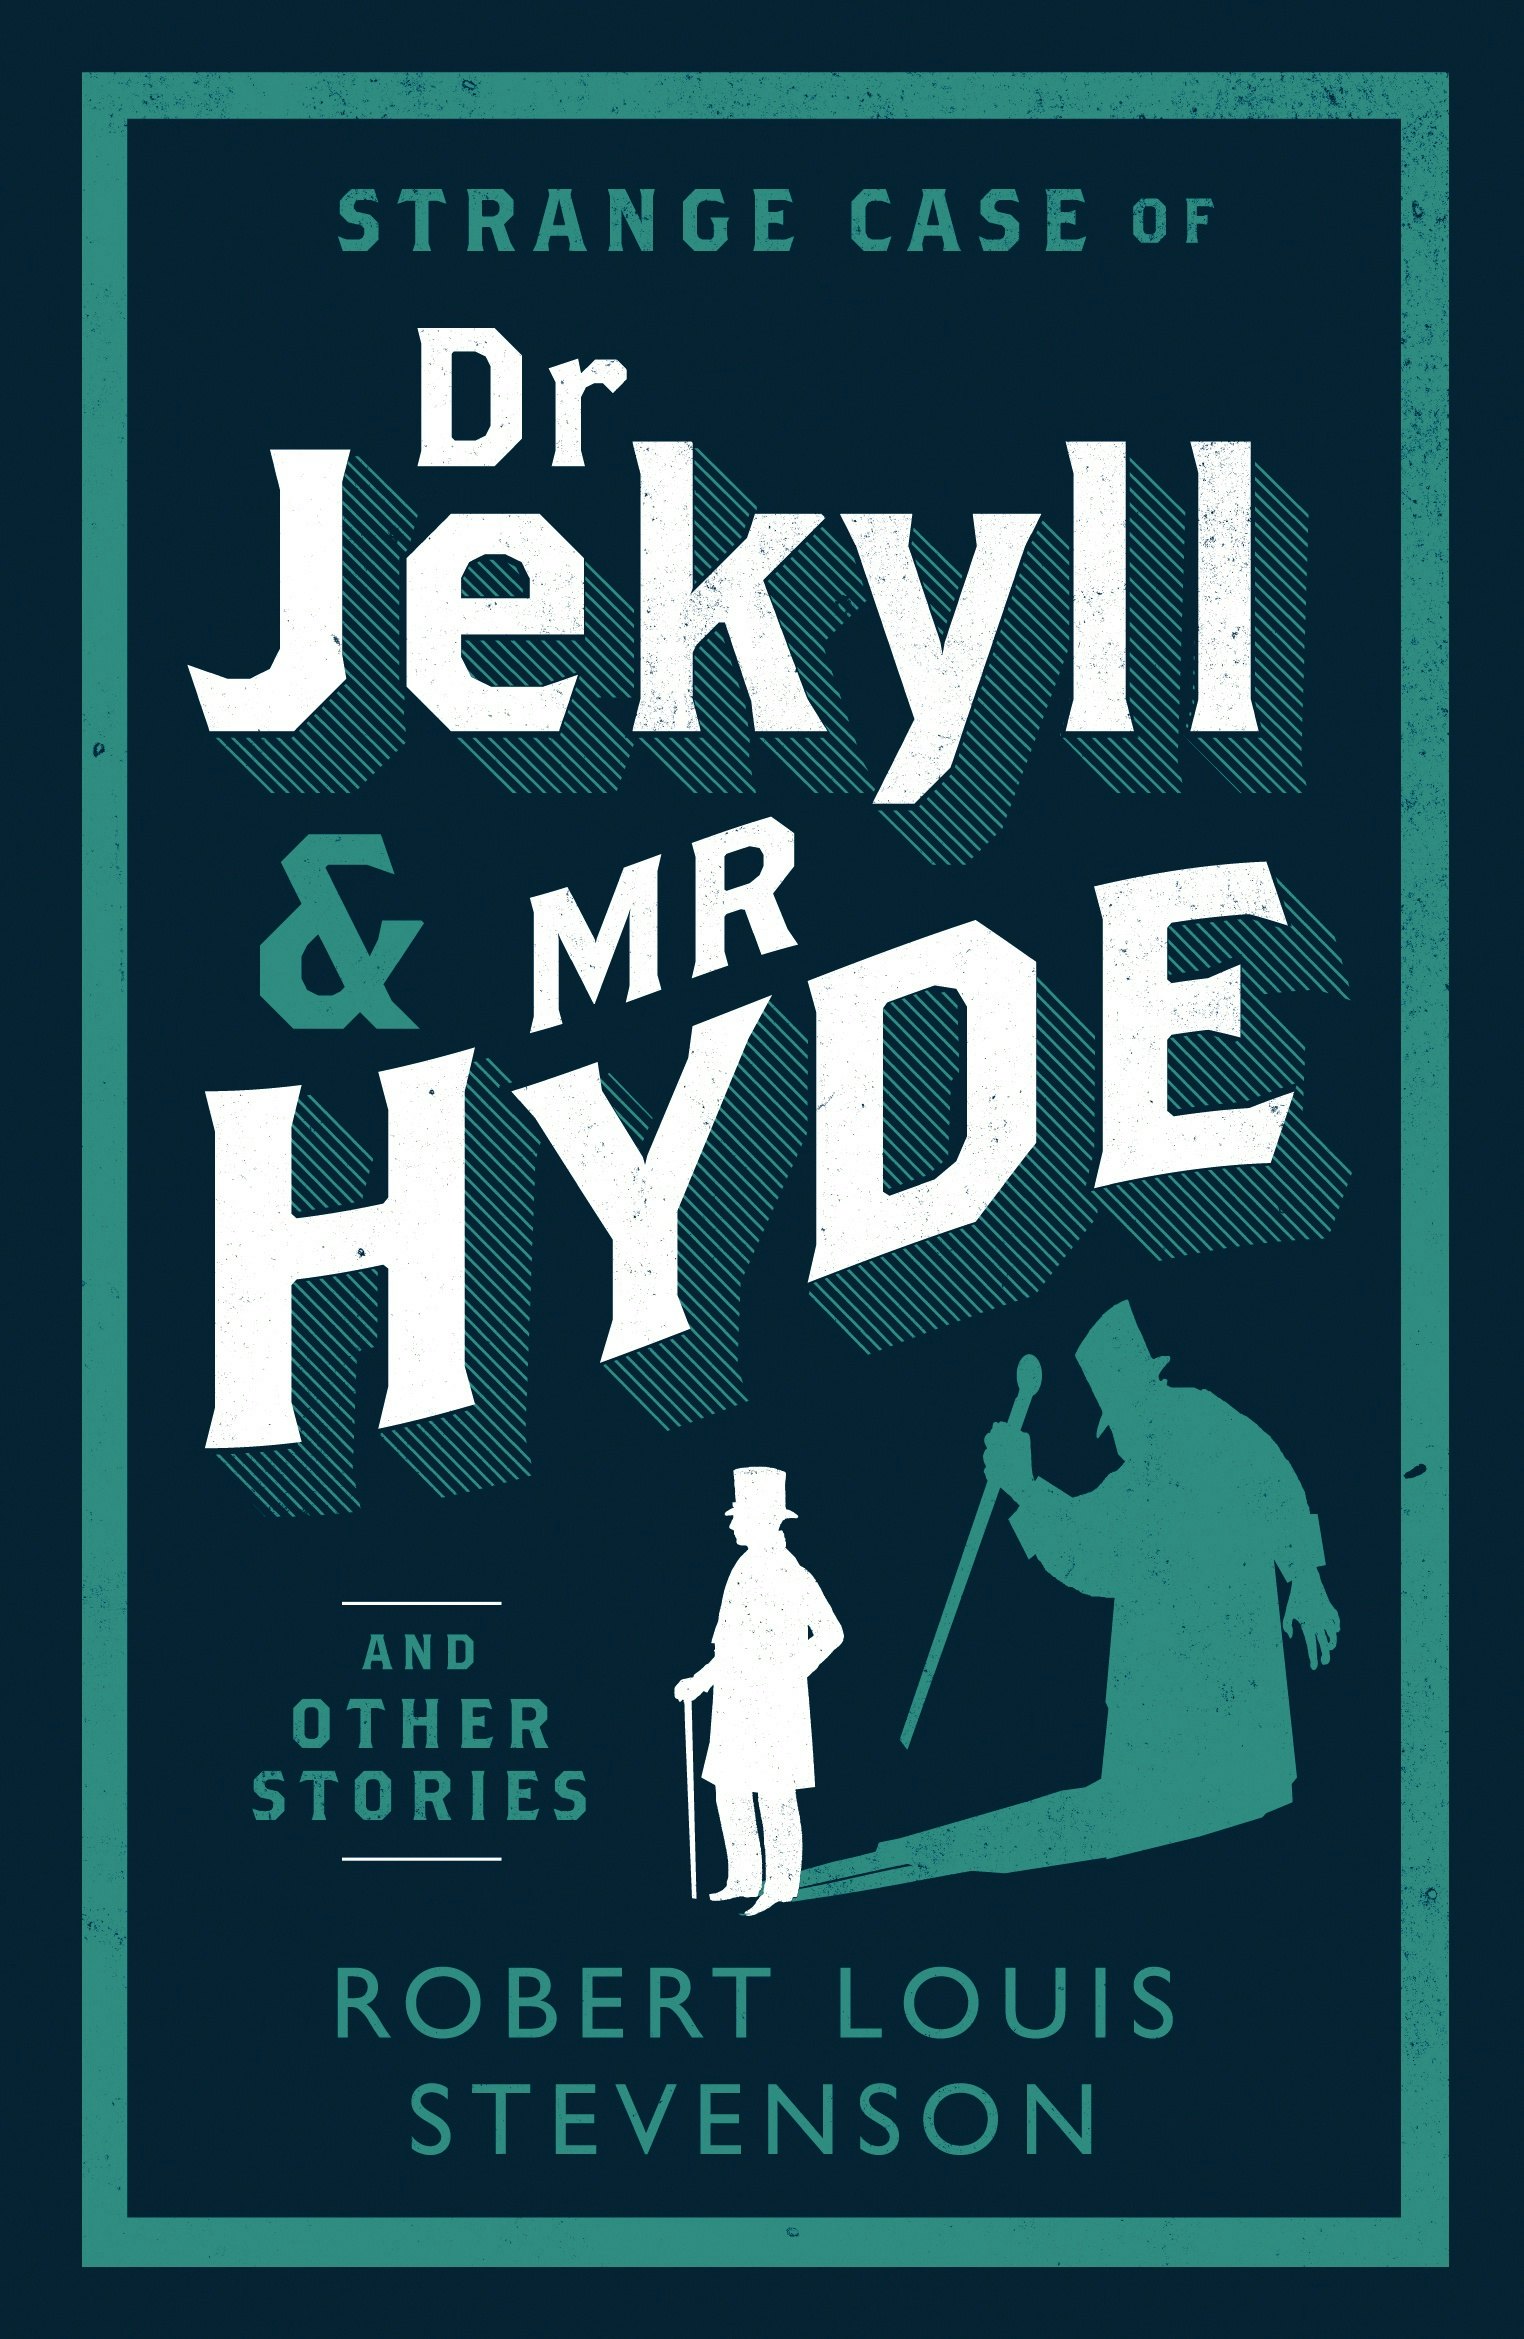 dr jekyll and mr hyde book cover